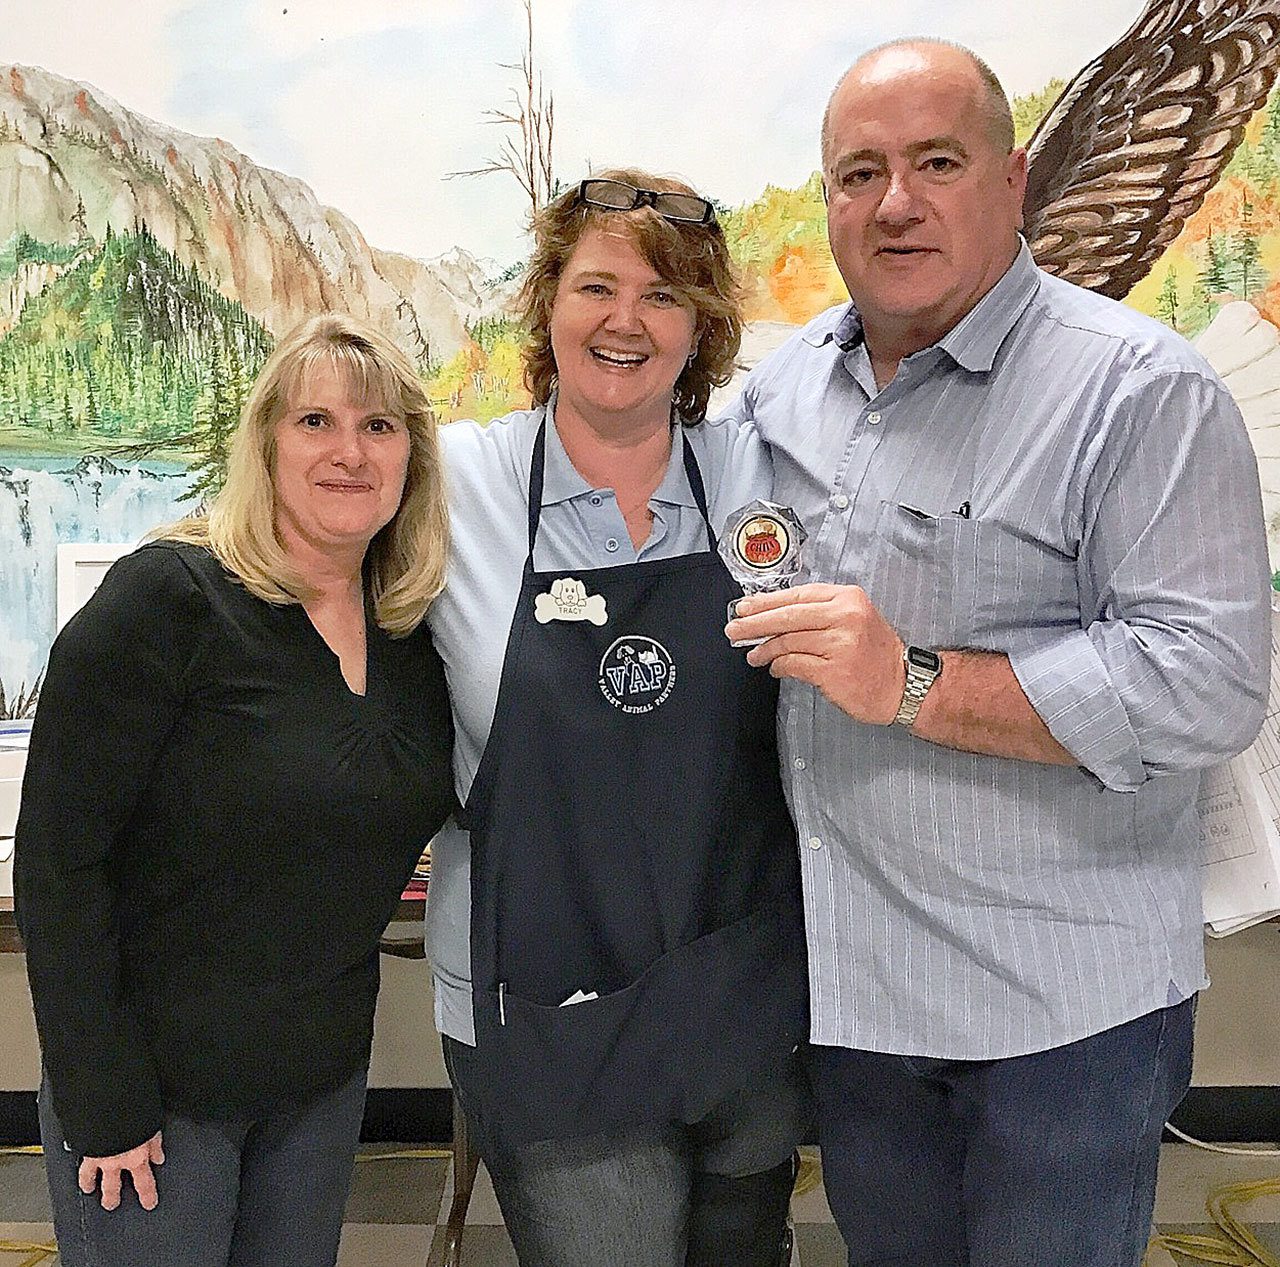 Valley Animal Partners member Tracy Skylstad, center, congratulates Nancy and Eric Anderson, left and right, on taking first place in the Valley Animal Partners Chili Showdown held Nov. 5. The organization raised more than $4,000 in the event. Courtesy Photo